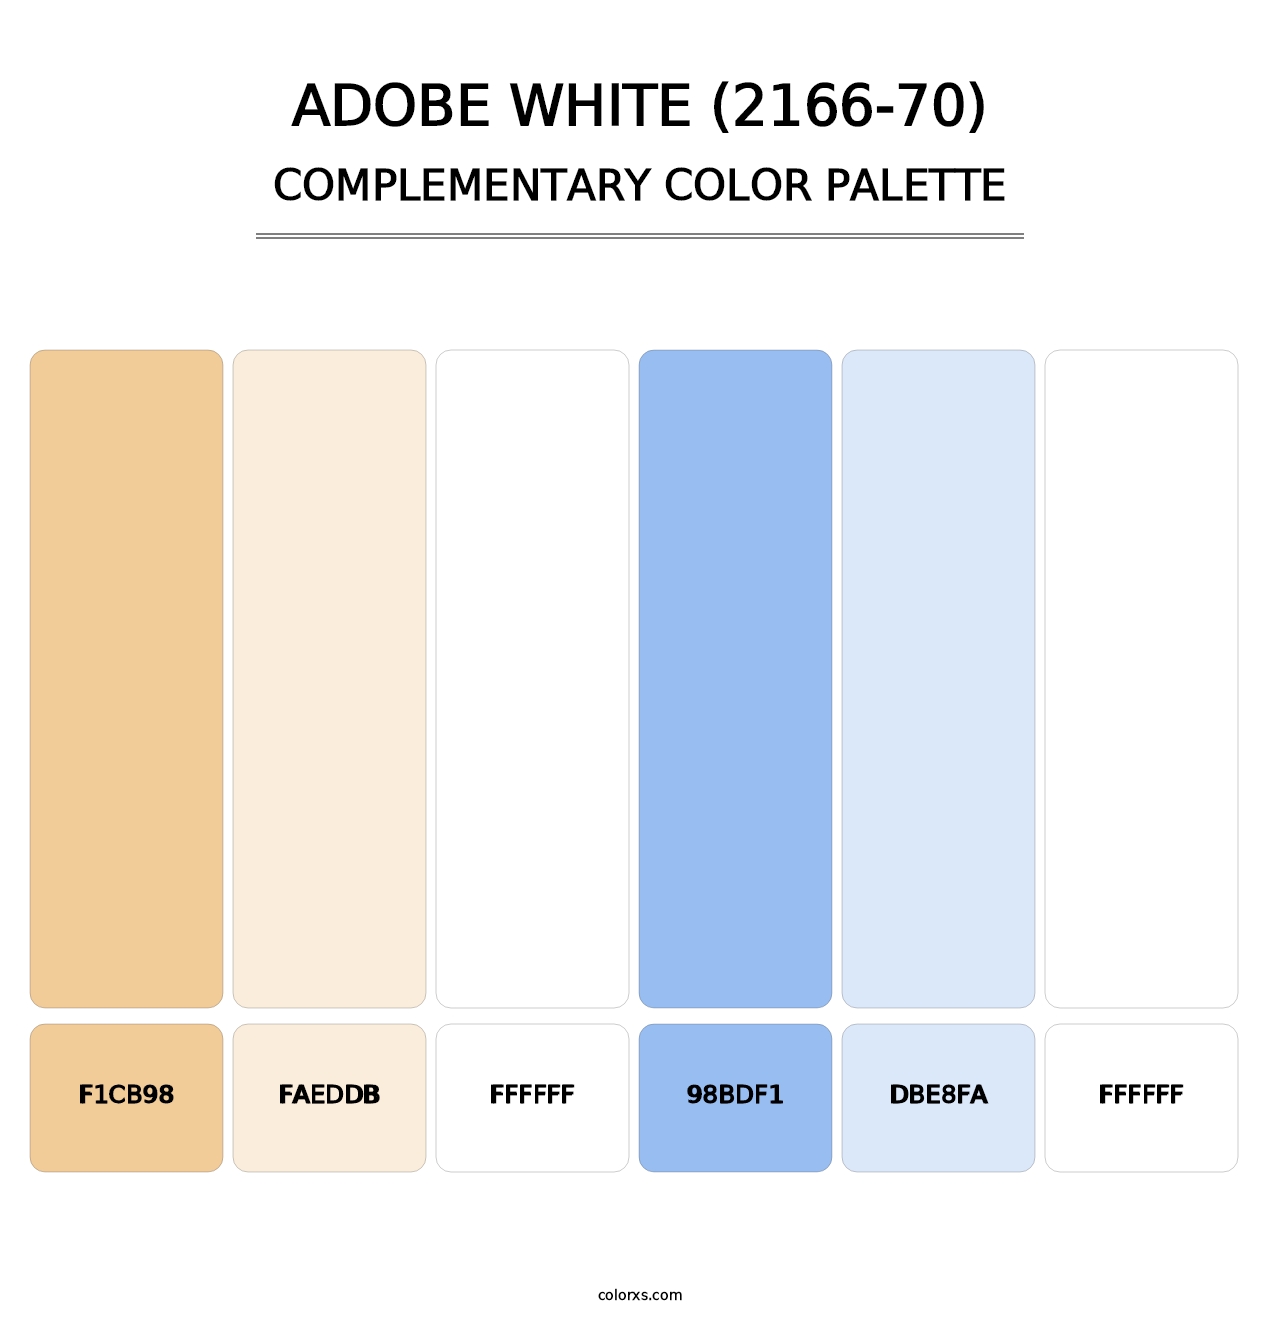 Adobe White (2166-70) - Complementary Color Palette